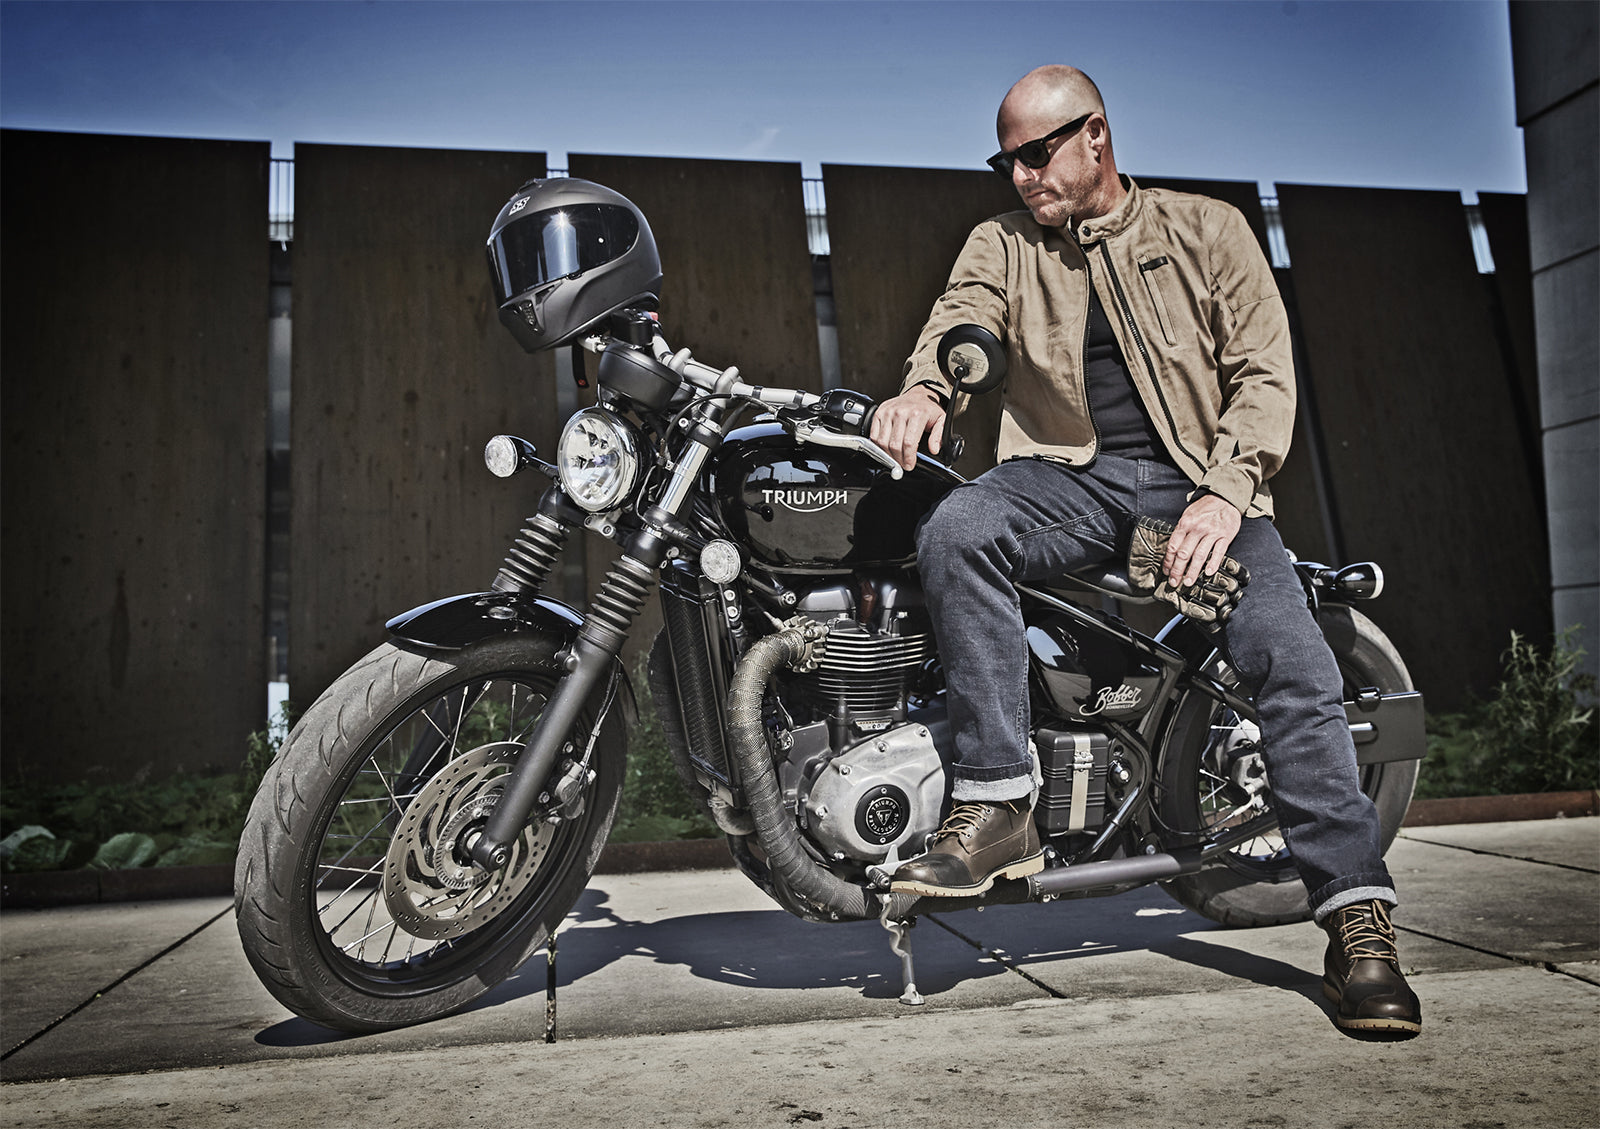 Speed & Strength Motorcycle Gear | Introducing The Rust and Redemption 2.0™ Street Jackets